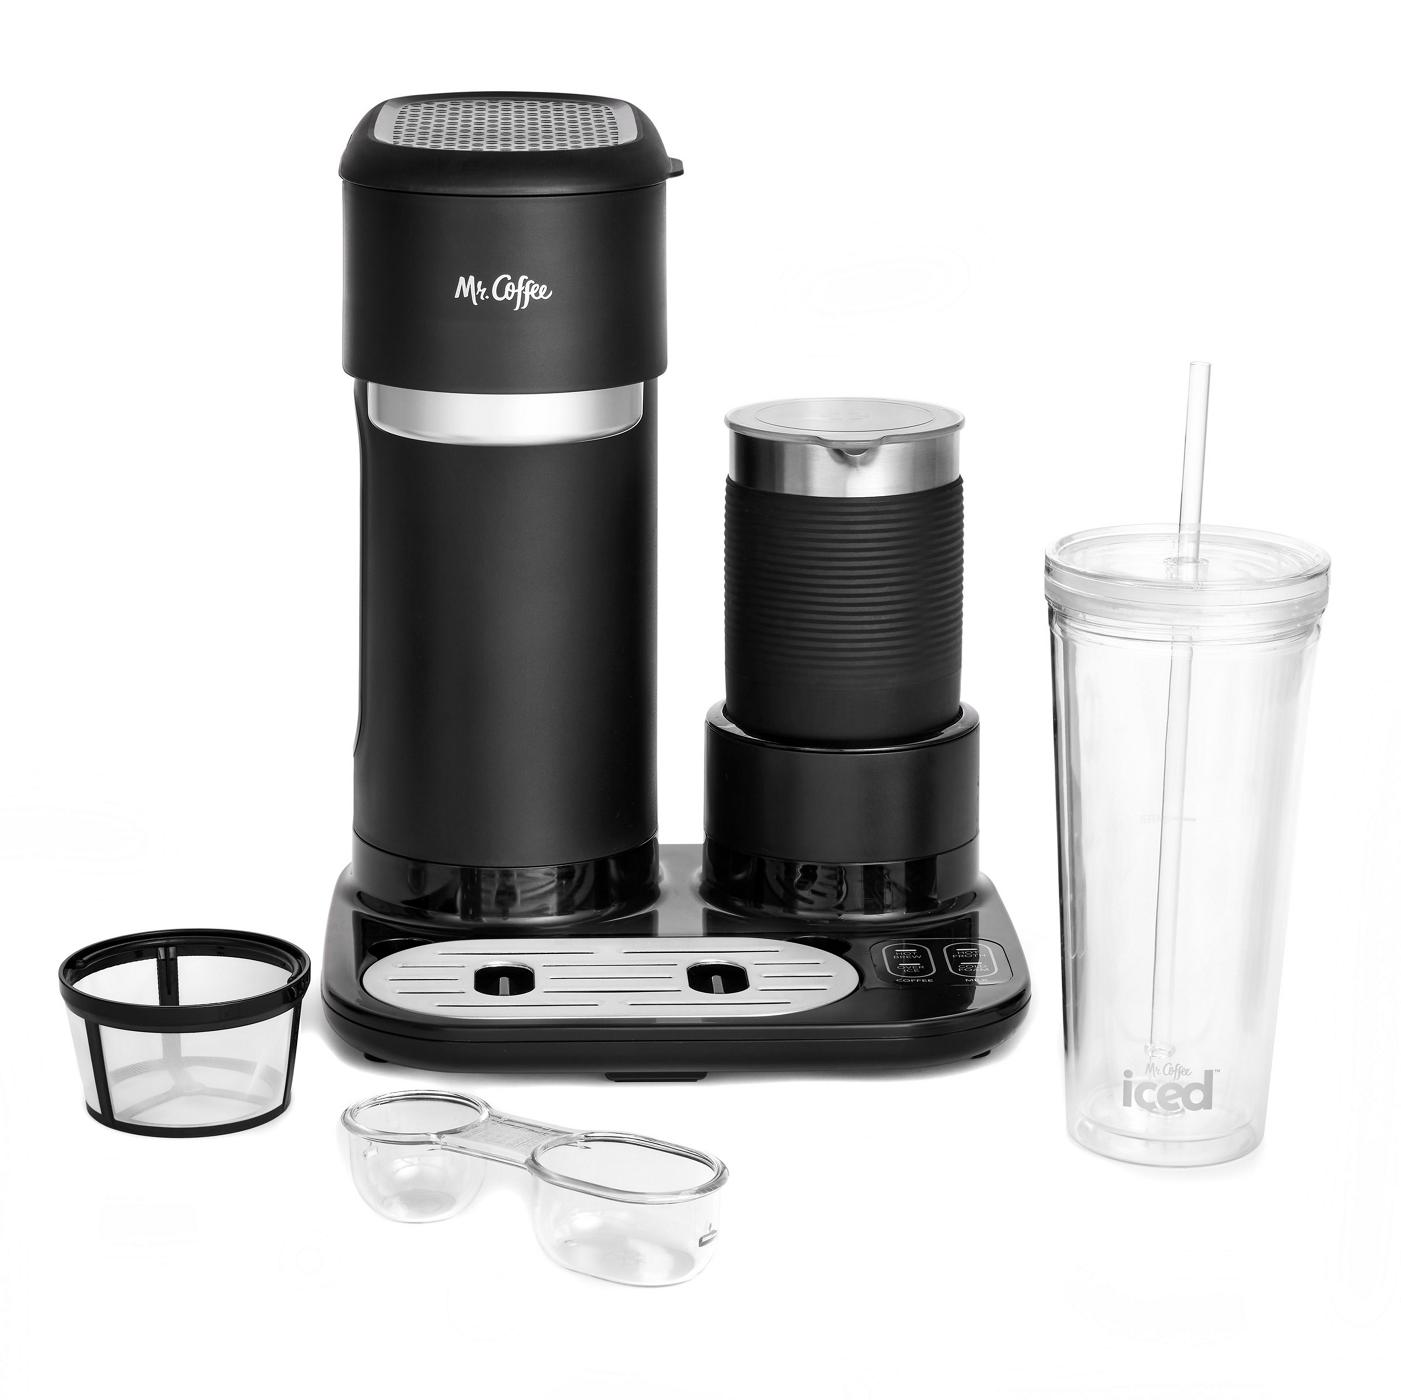  Mr. Coffee Iced and Hot Coffee Maker, Single Serve